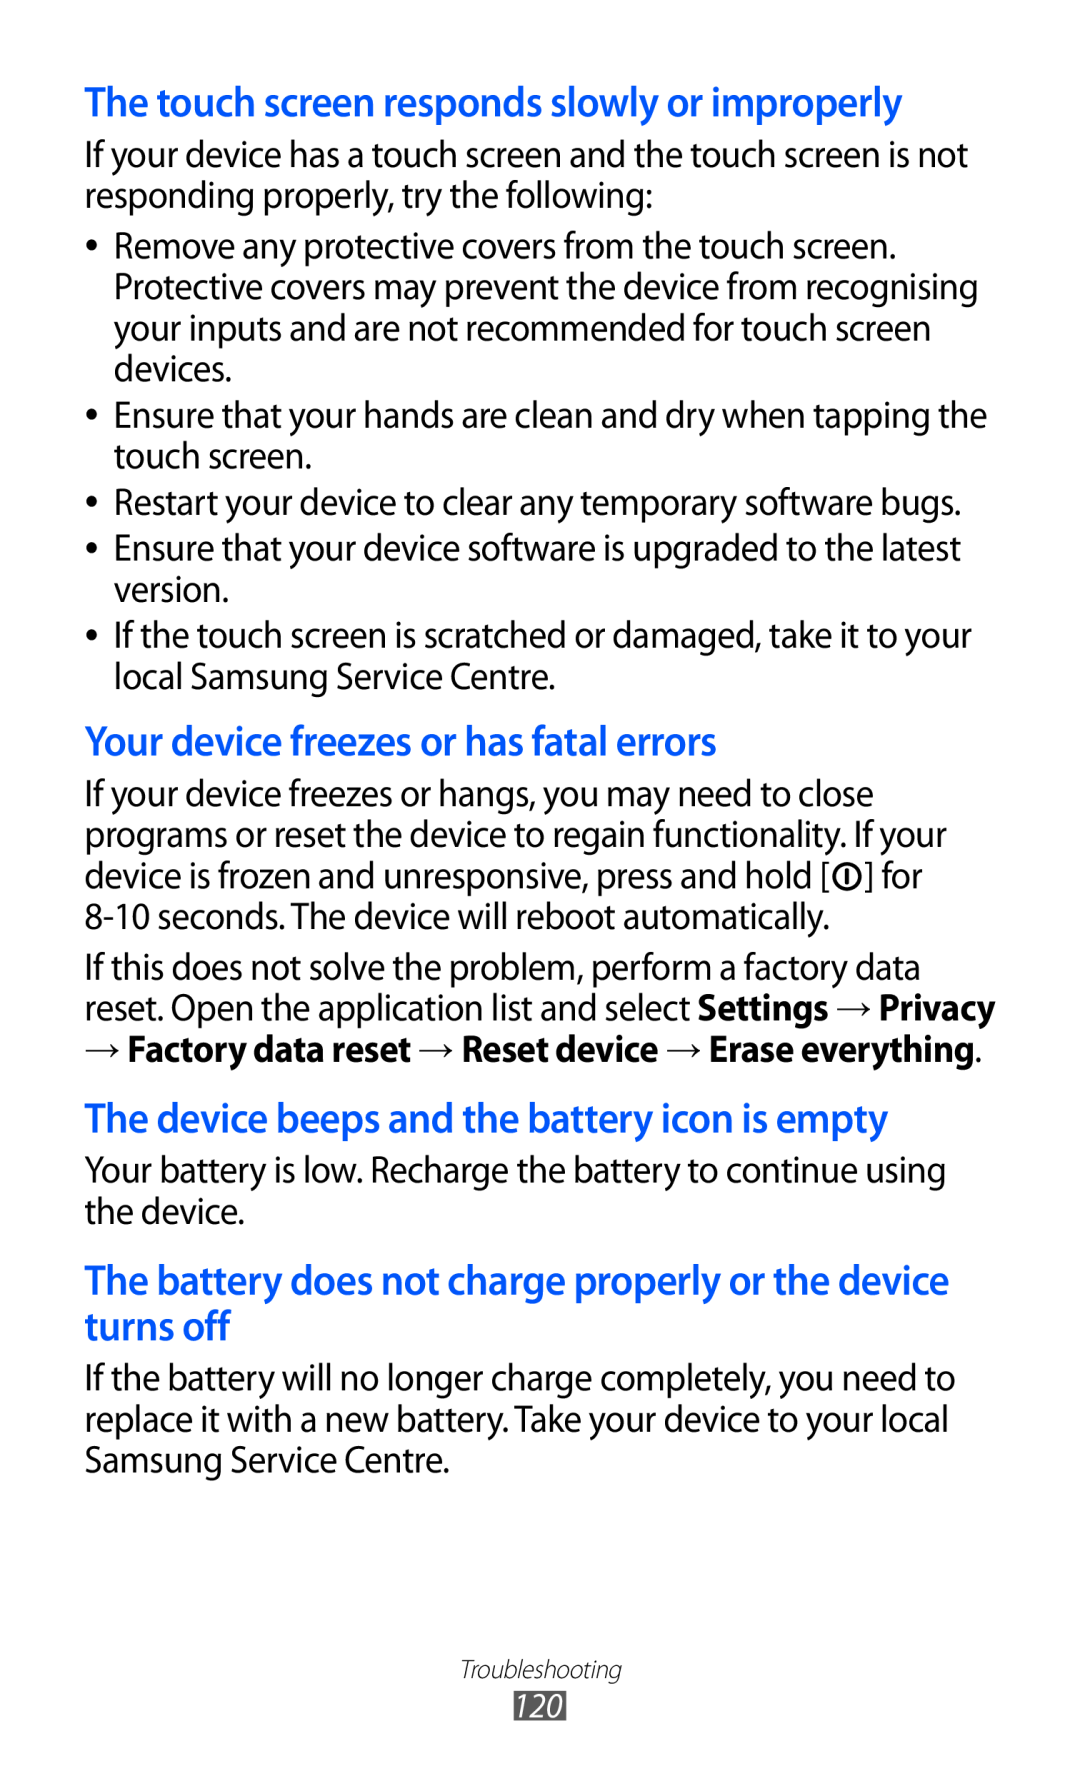 Samsung GT-P7320UWAVD2 manual Your device freezes or has fatal errors, The device beeps and the battery icon is empty 